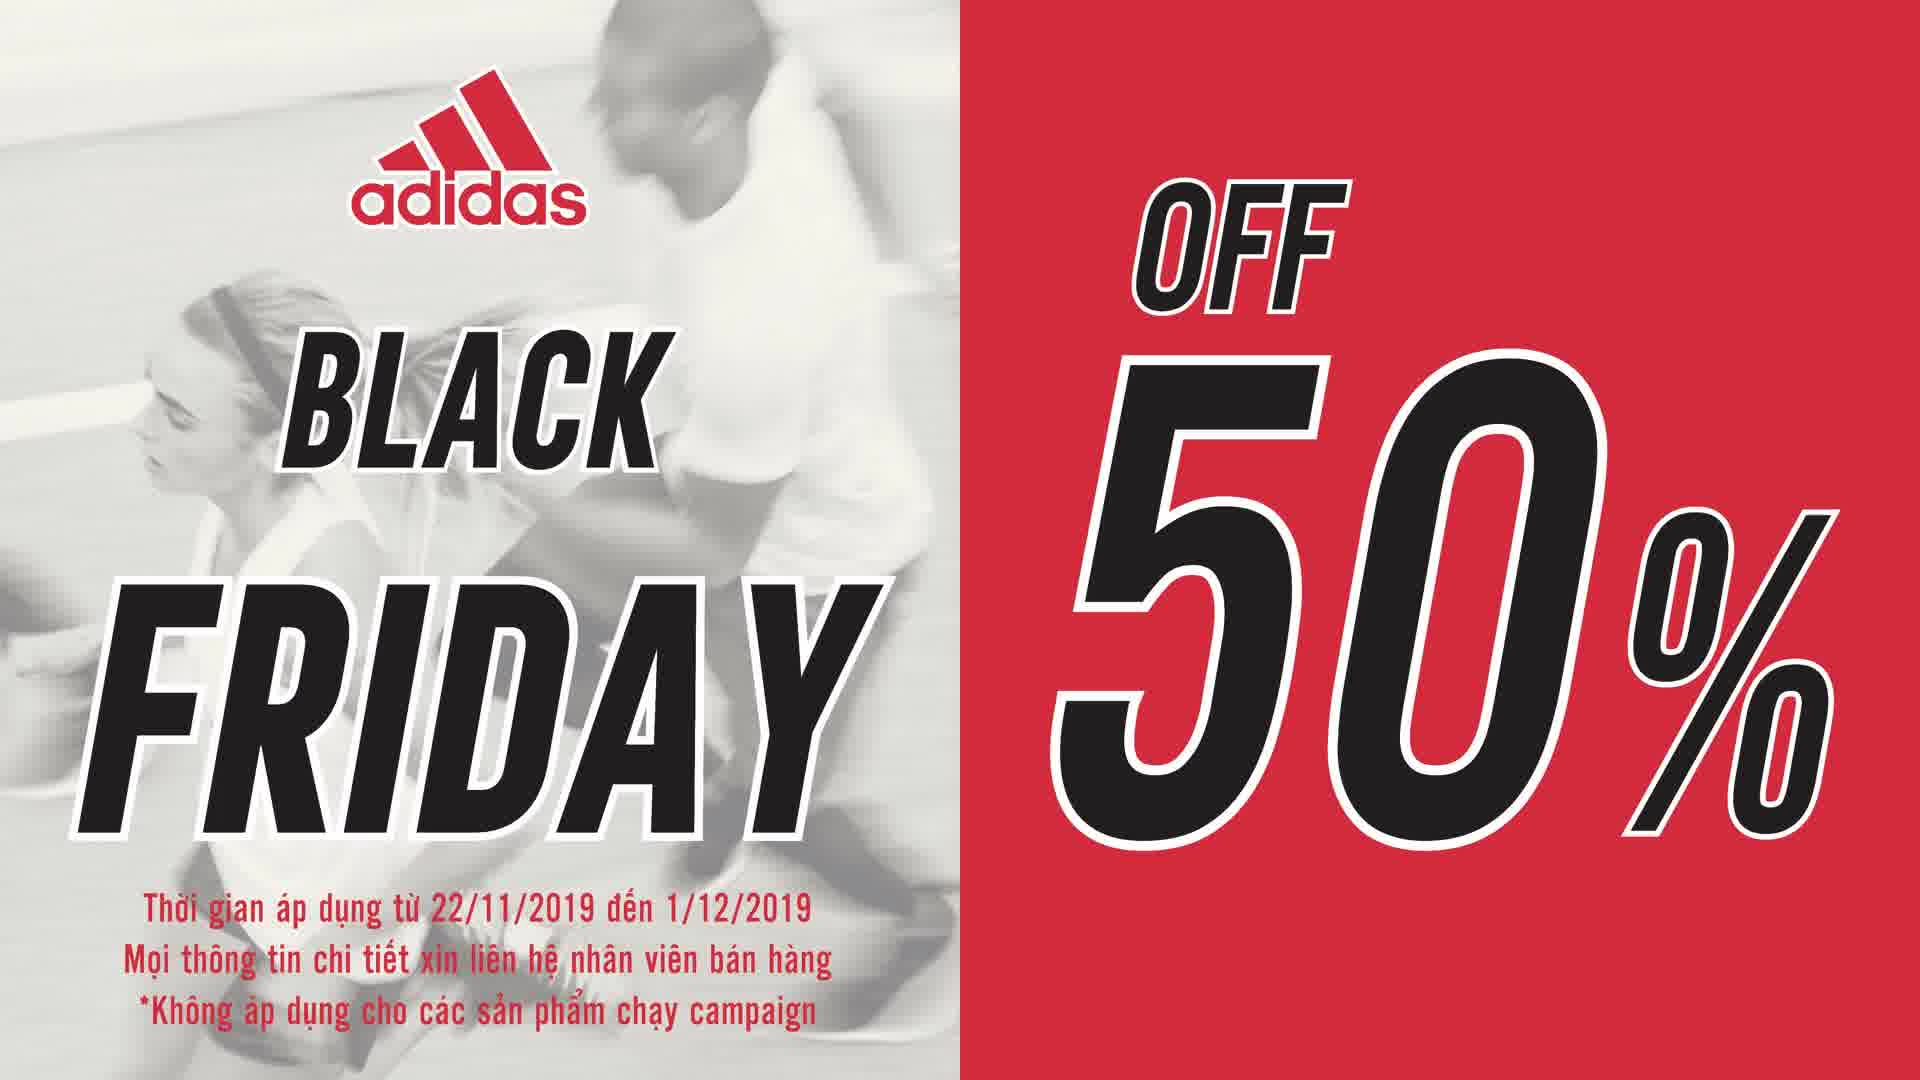 when is adidas black friday